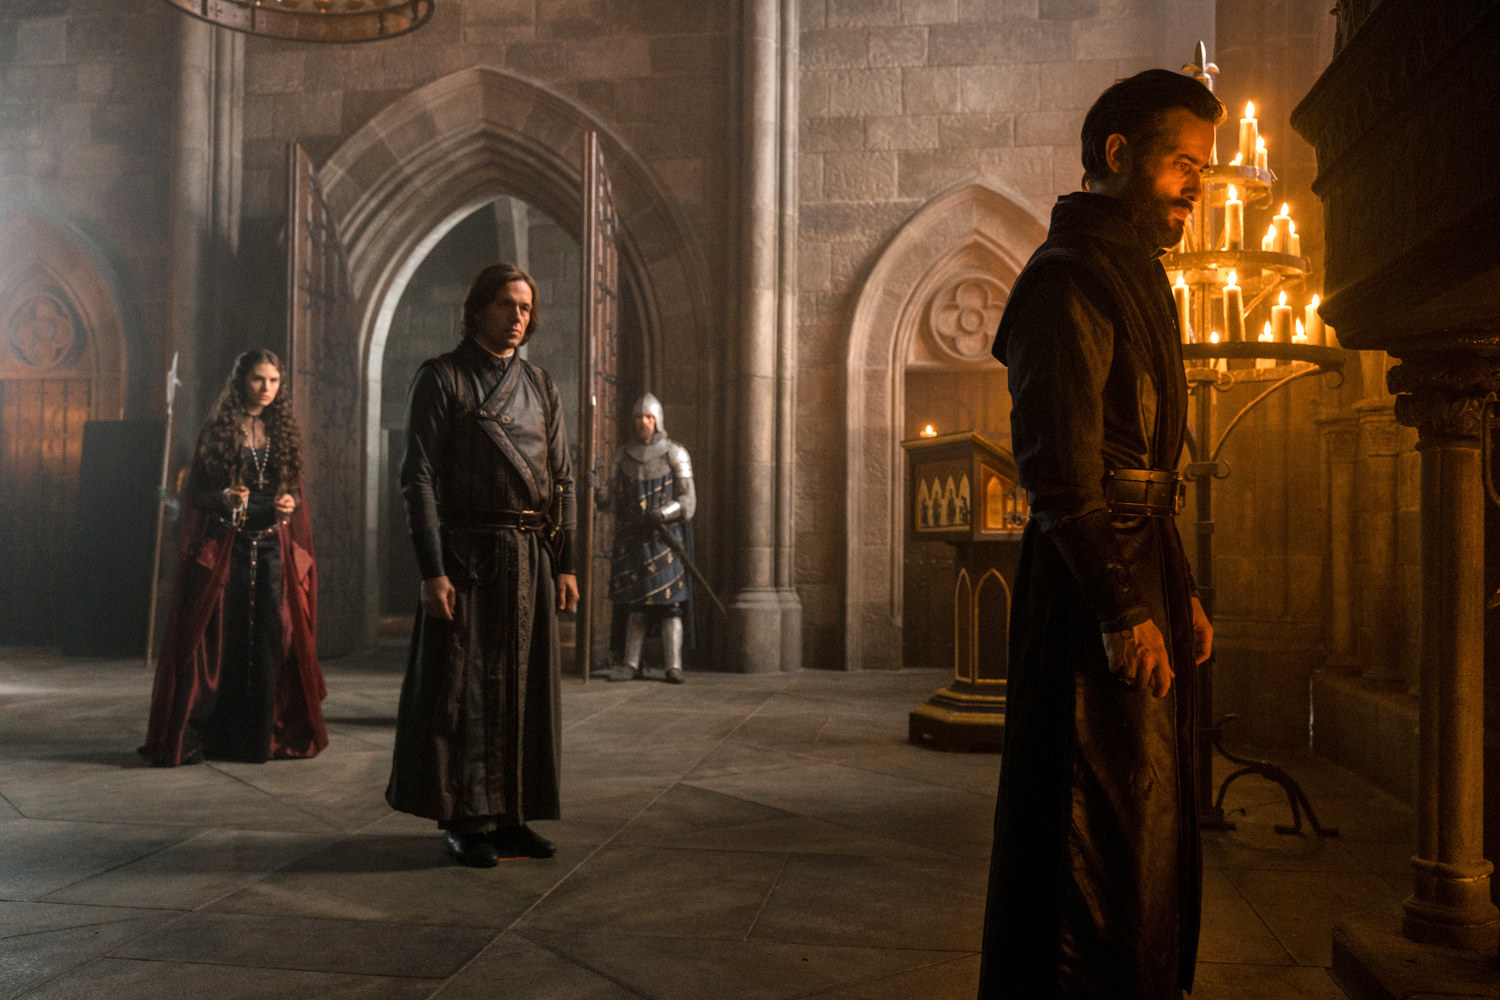 KNIGHTFALL, from left: Genevieve Gaunt, Julian Ovenden, Ed Stoppard, &#x27;God&#x27;s Executioners&#x27; (Season 2, ep. 201, aired March 25, 2019)